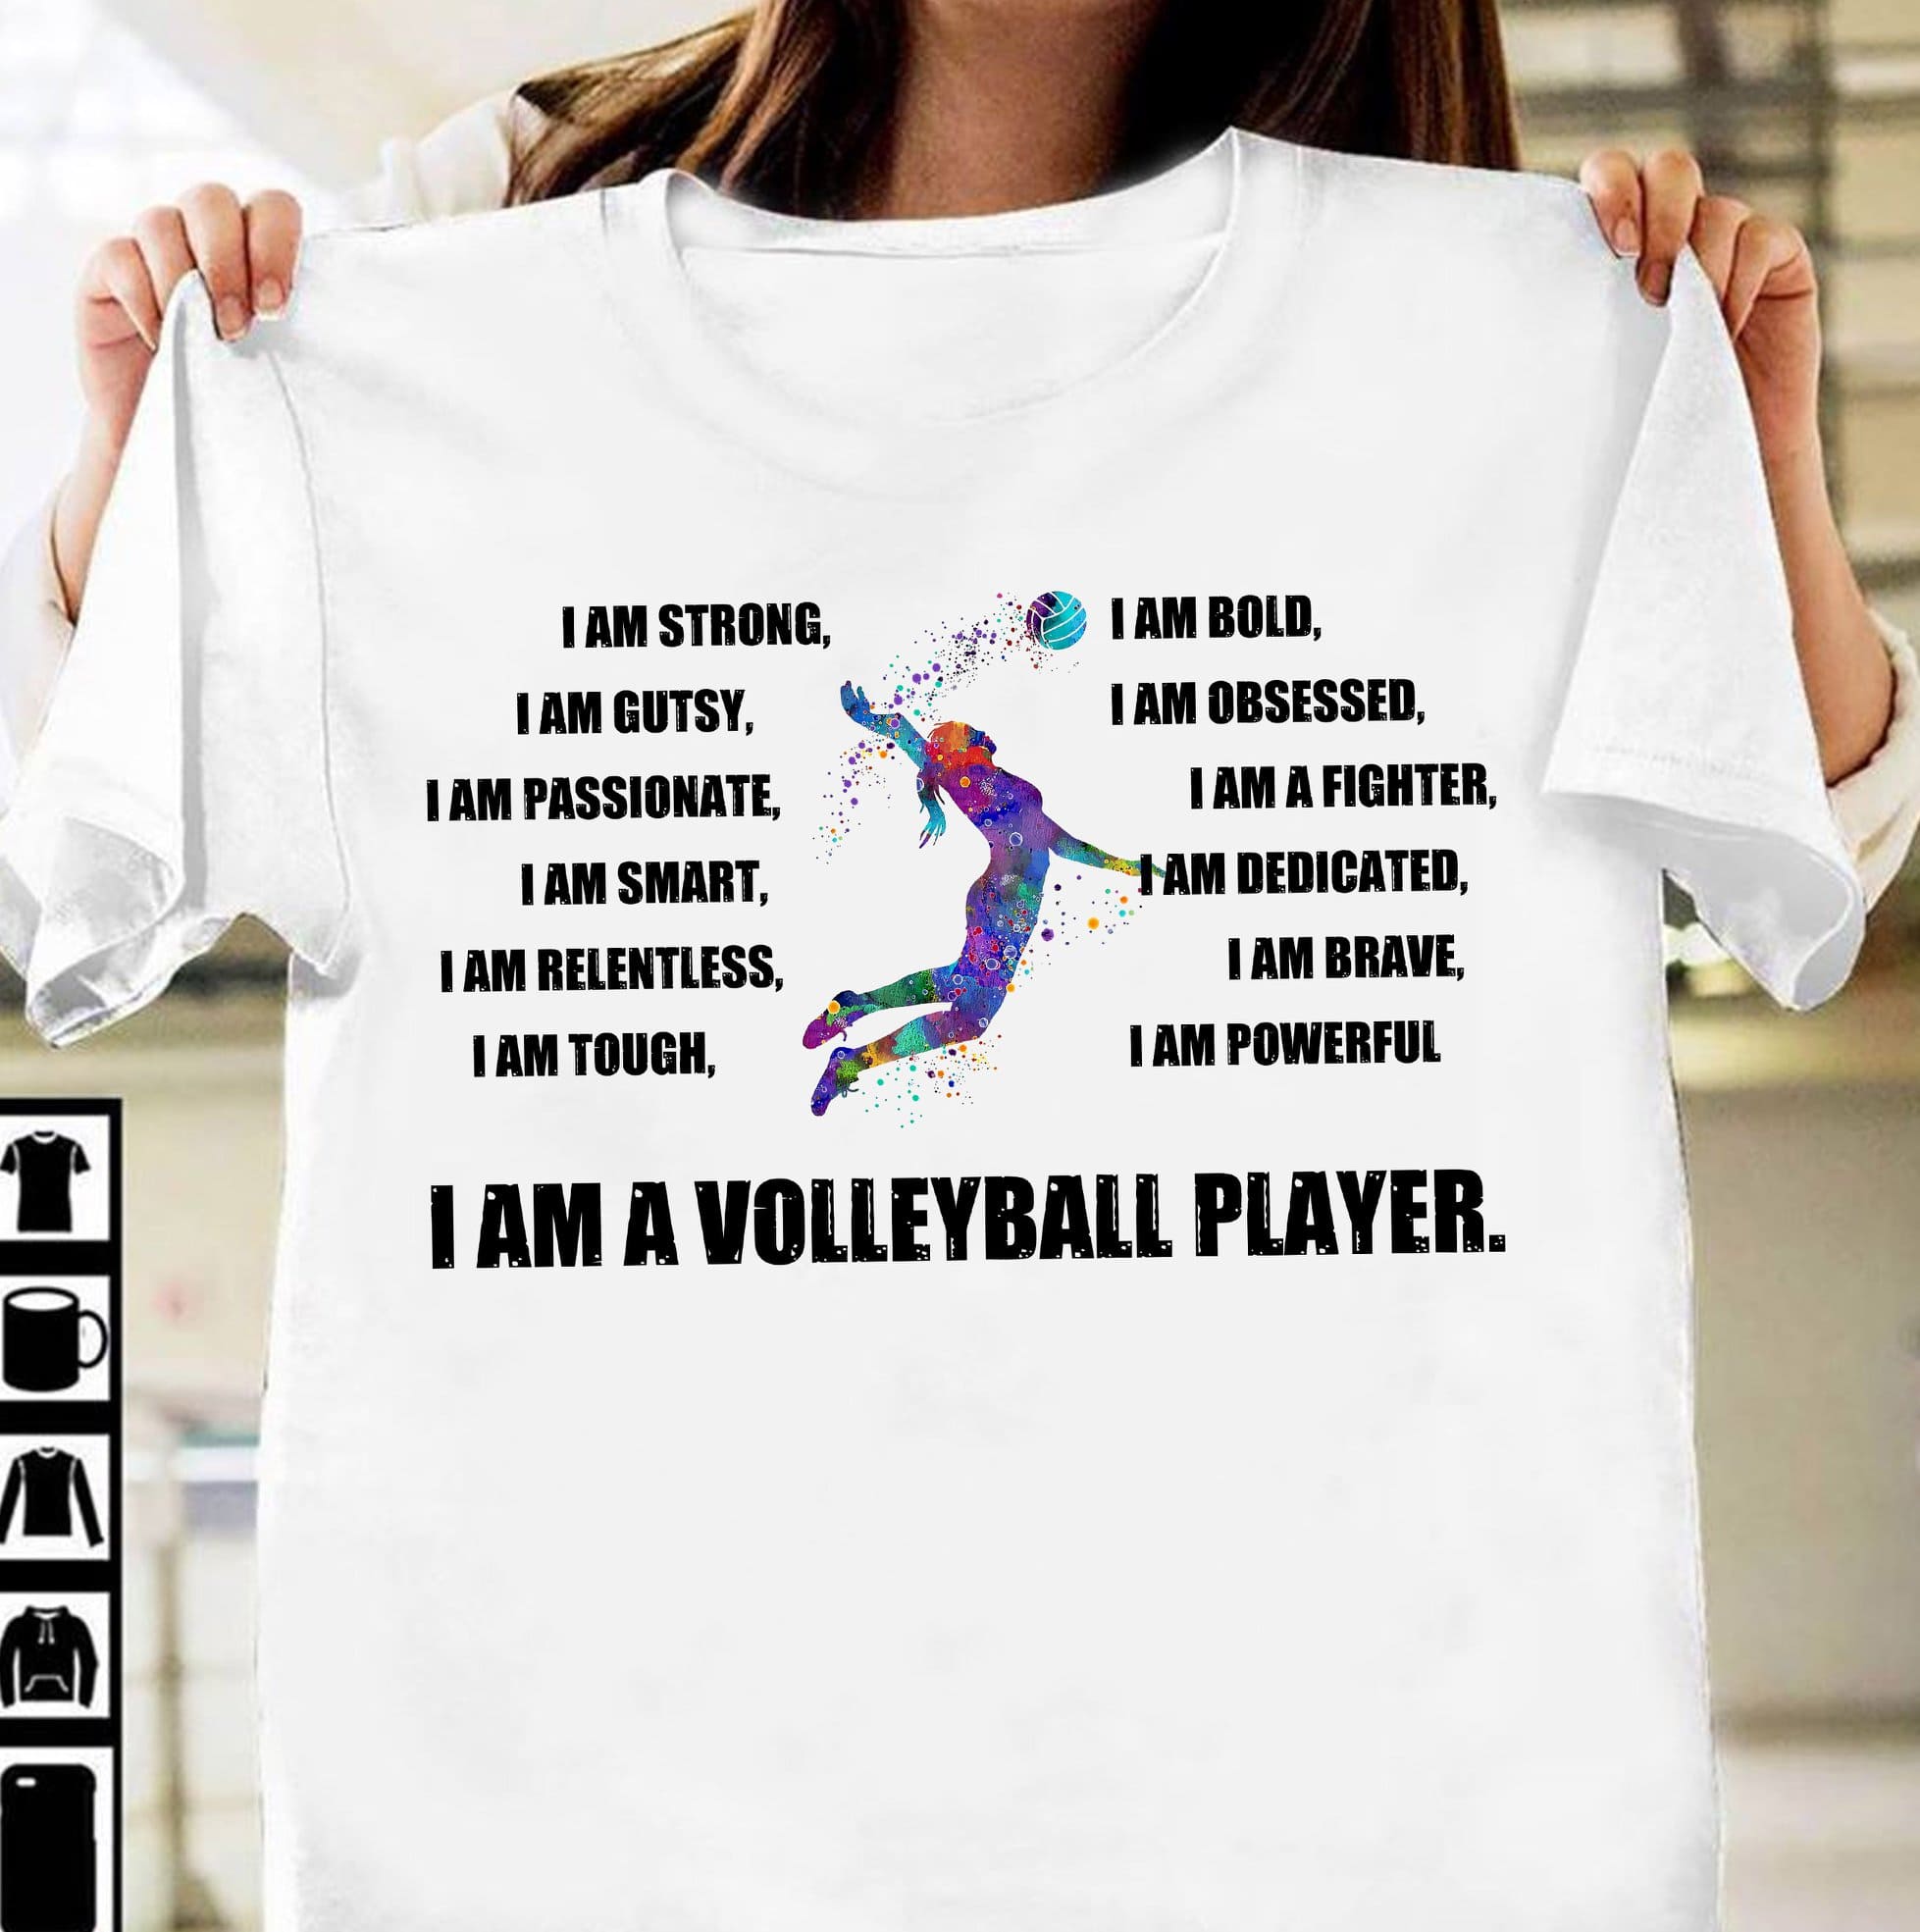 Volleyball player T-shirt - Strong volleyballer, woman playing volleyball